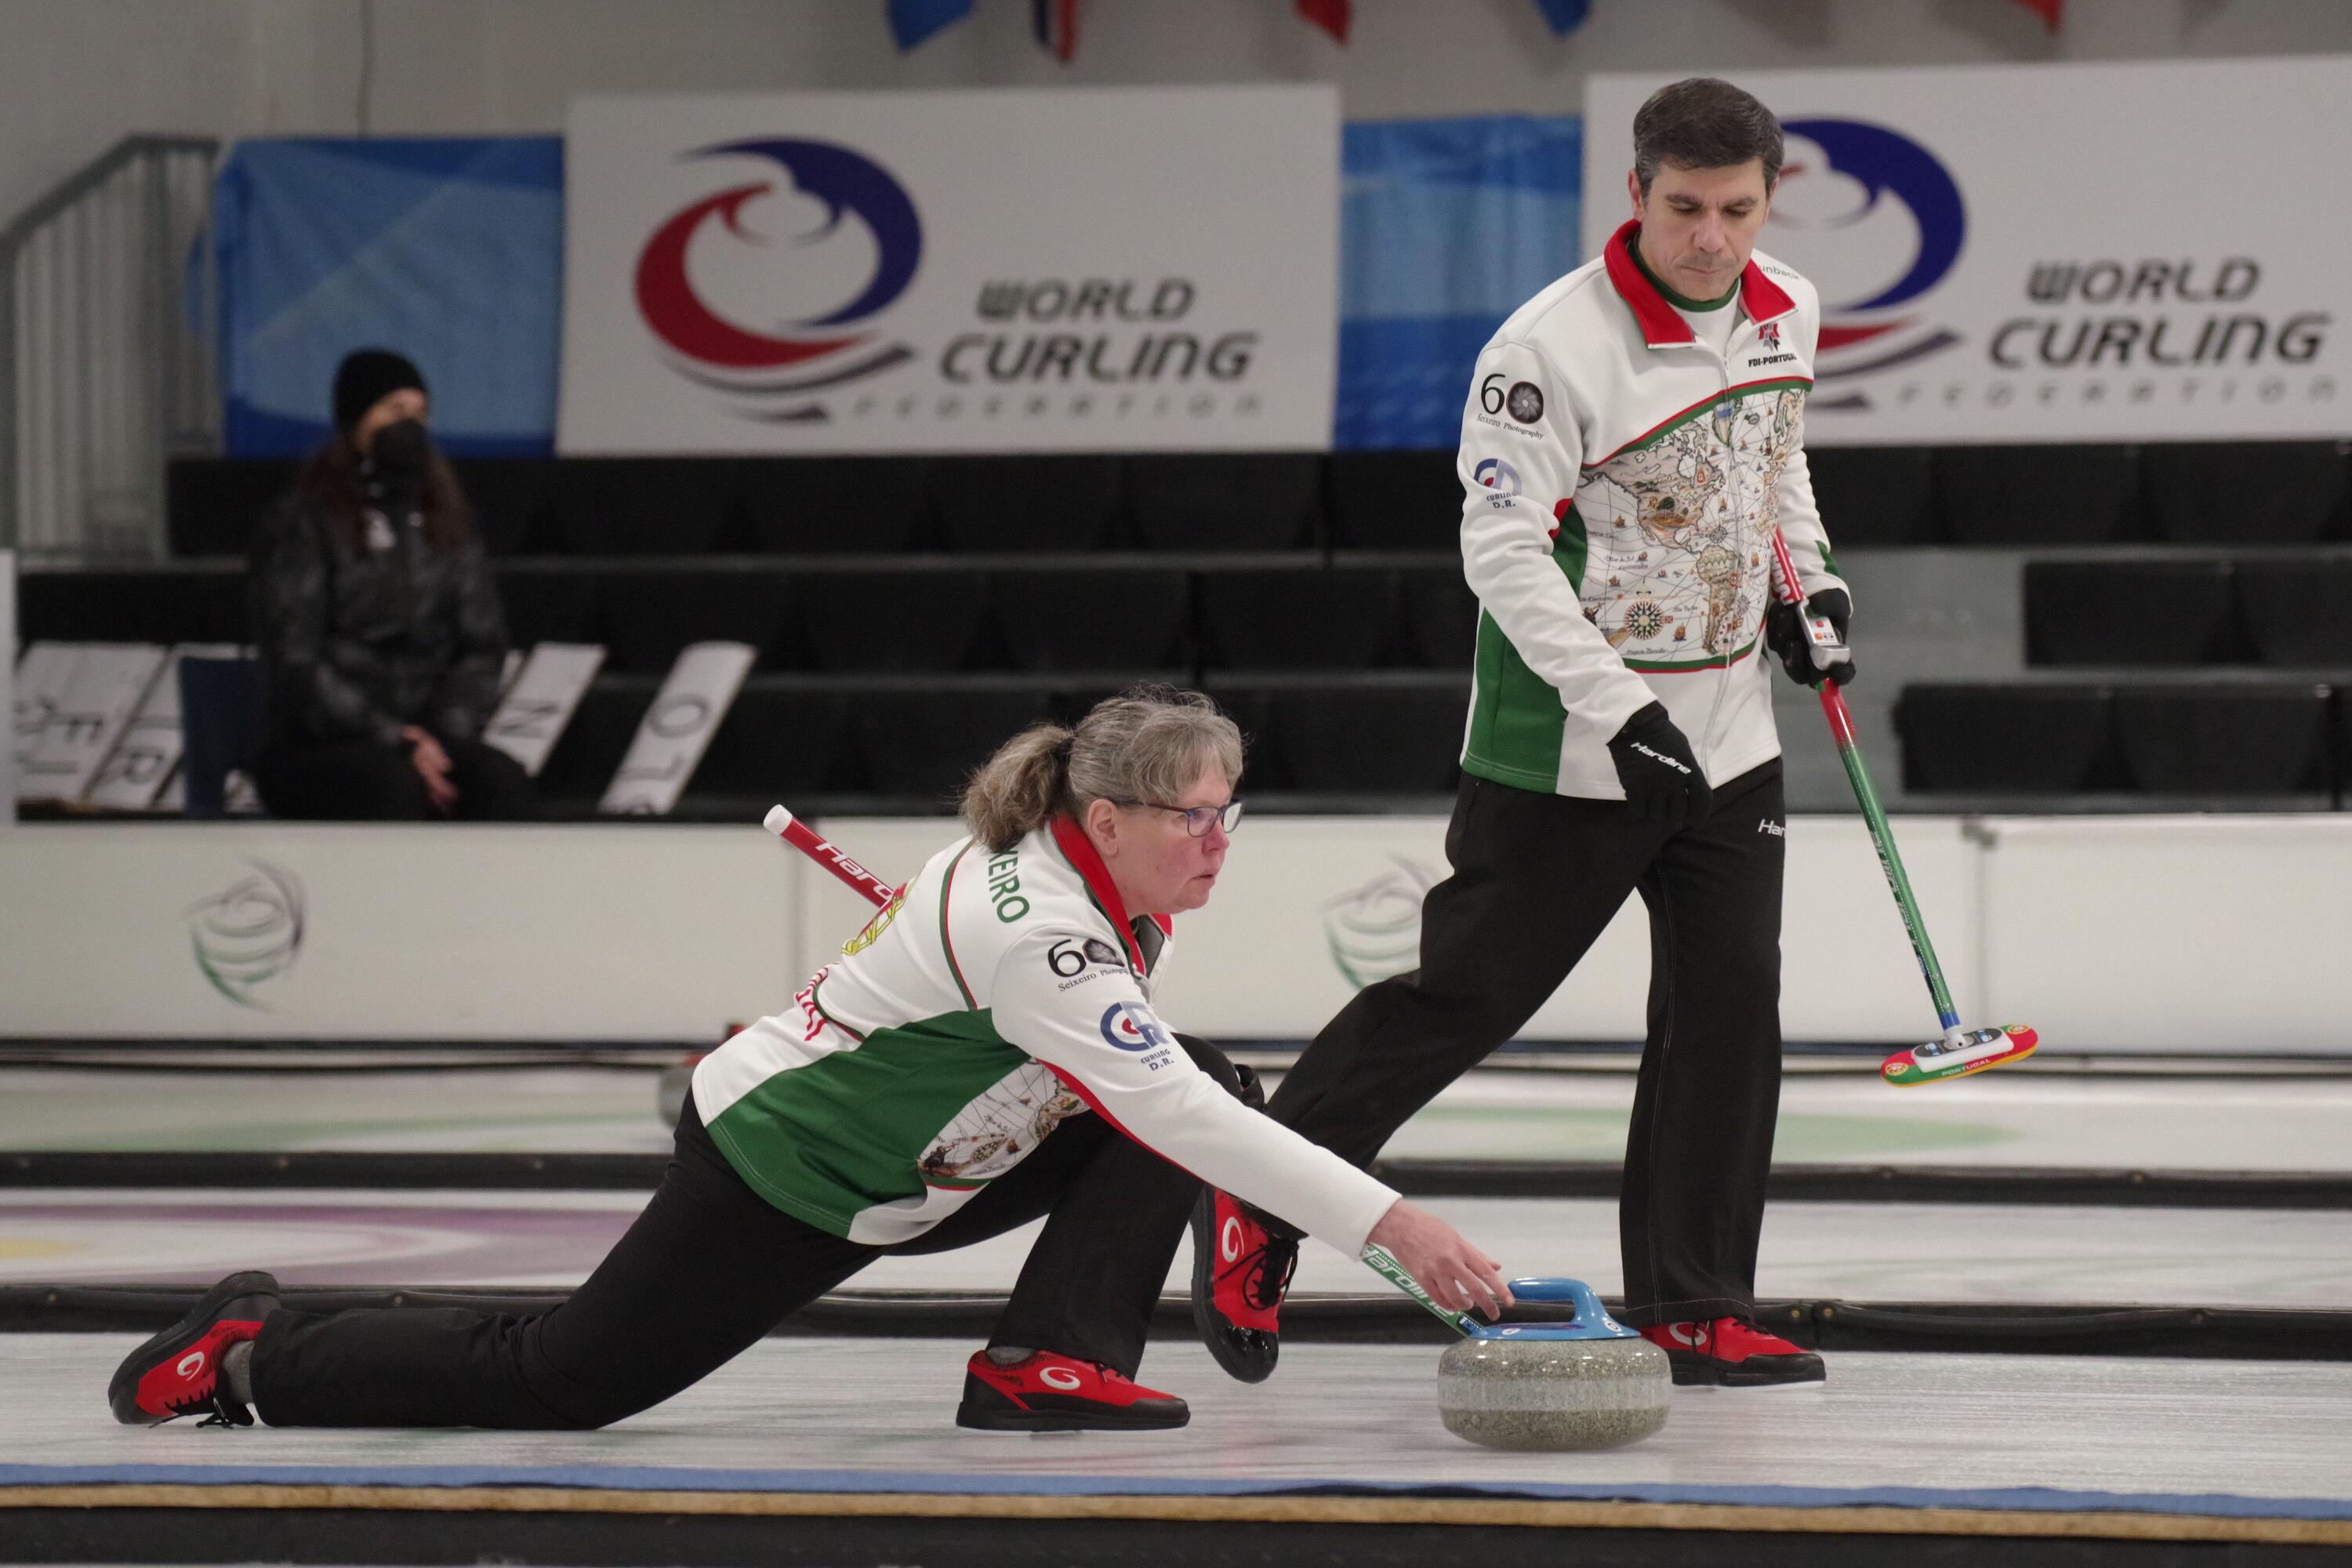 couple curling